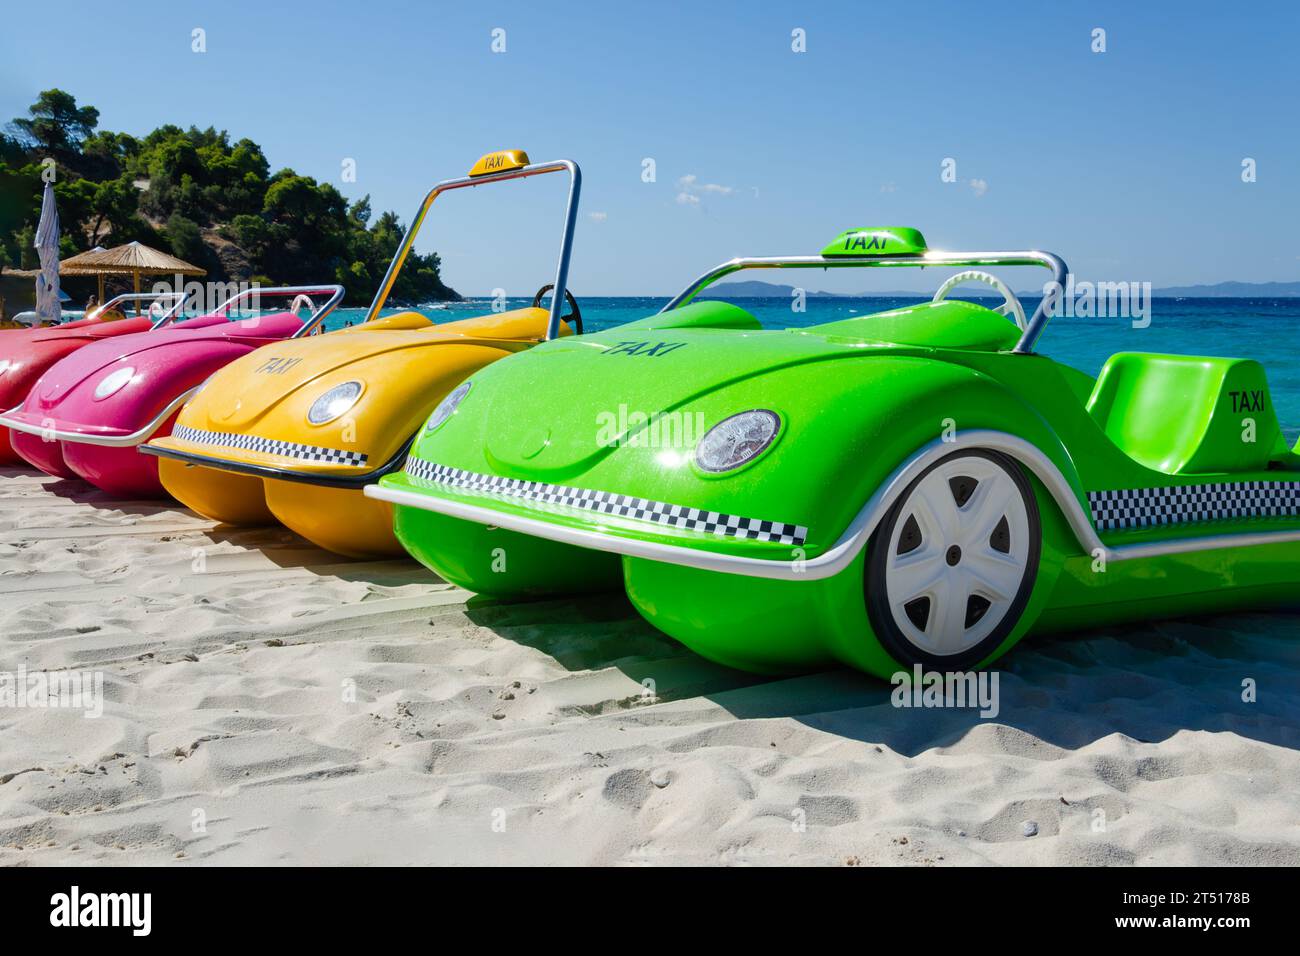 pedal catamarans in shape of  car lined up in  row. boats of different colors standing on sand Stock Photo